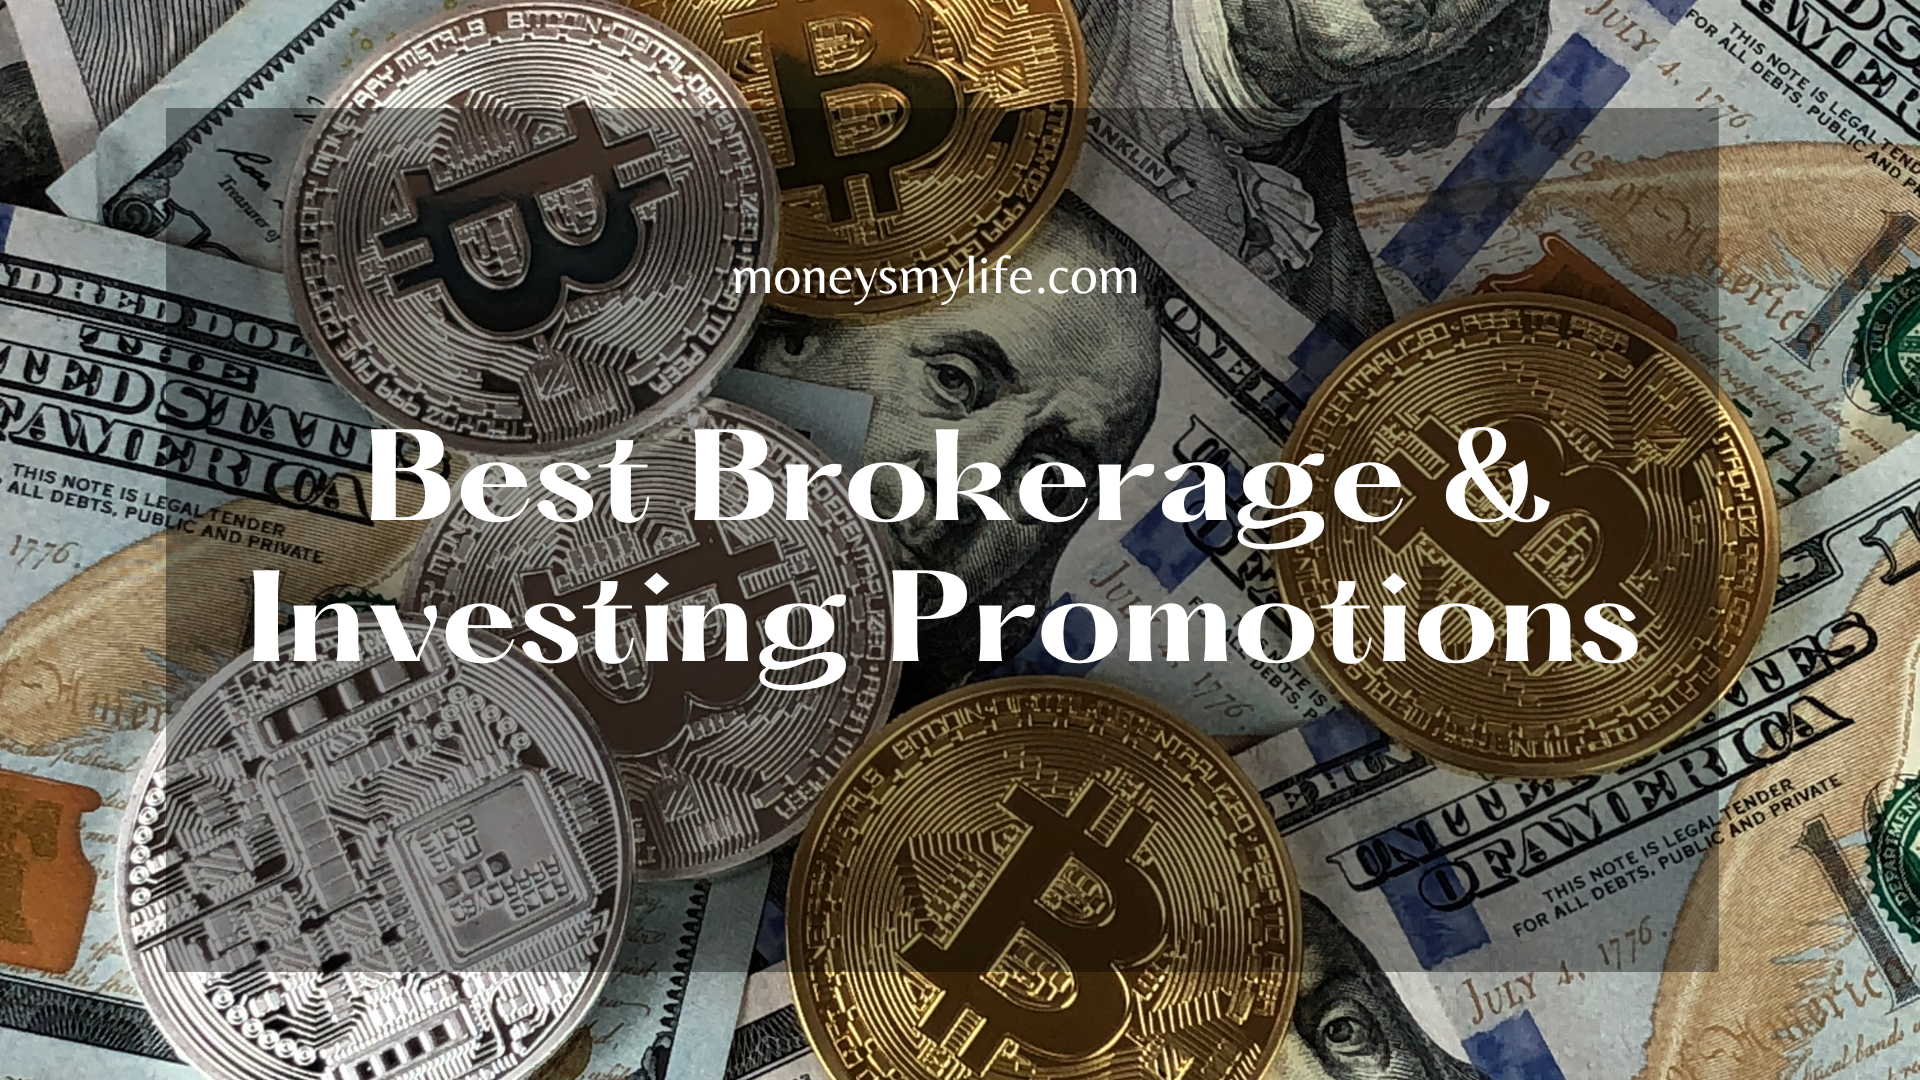 Brokerage and Investing Promotions from moneysmylife